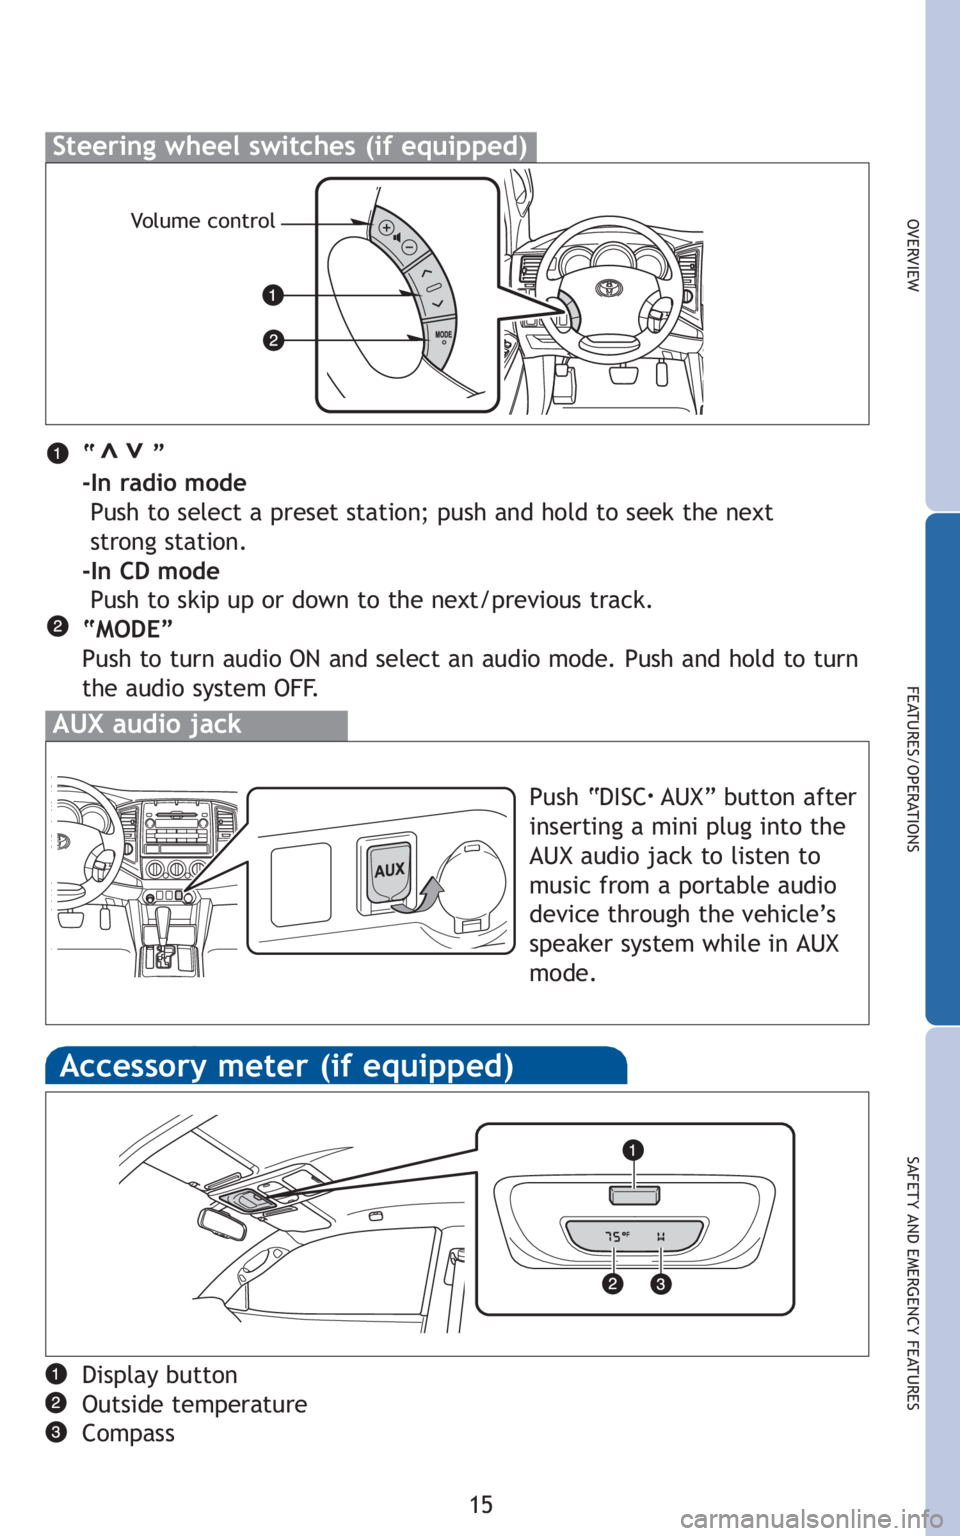 TOYOTA TACOMA 2010  Owners Manual (in English) 15
OVERVIEW
FEATURES/OPERATIONS
SAFETY AND EMERGENCY FEATURES
“       ”
-In radio mode
Push to select a preset station; push and hold to seek the next 
strong station. 
-In CD mode
Push to skip up